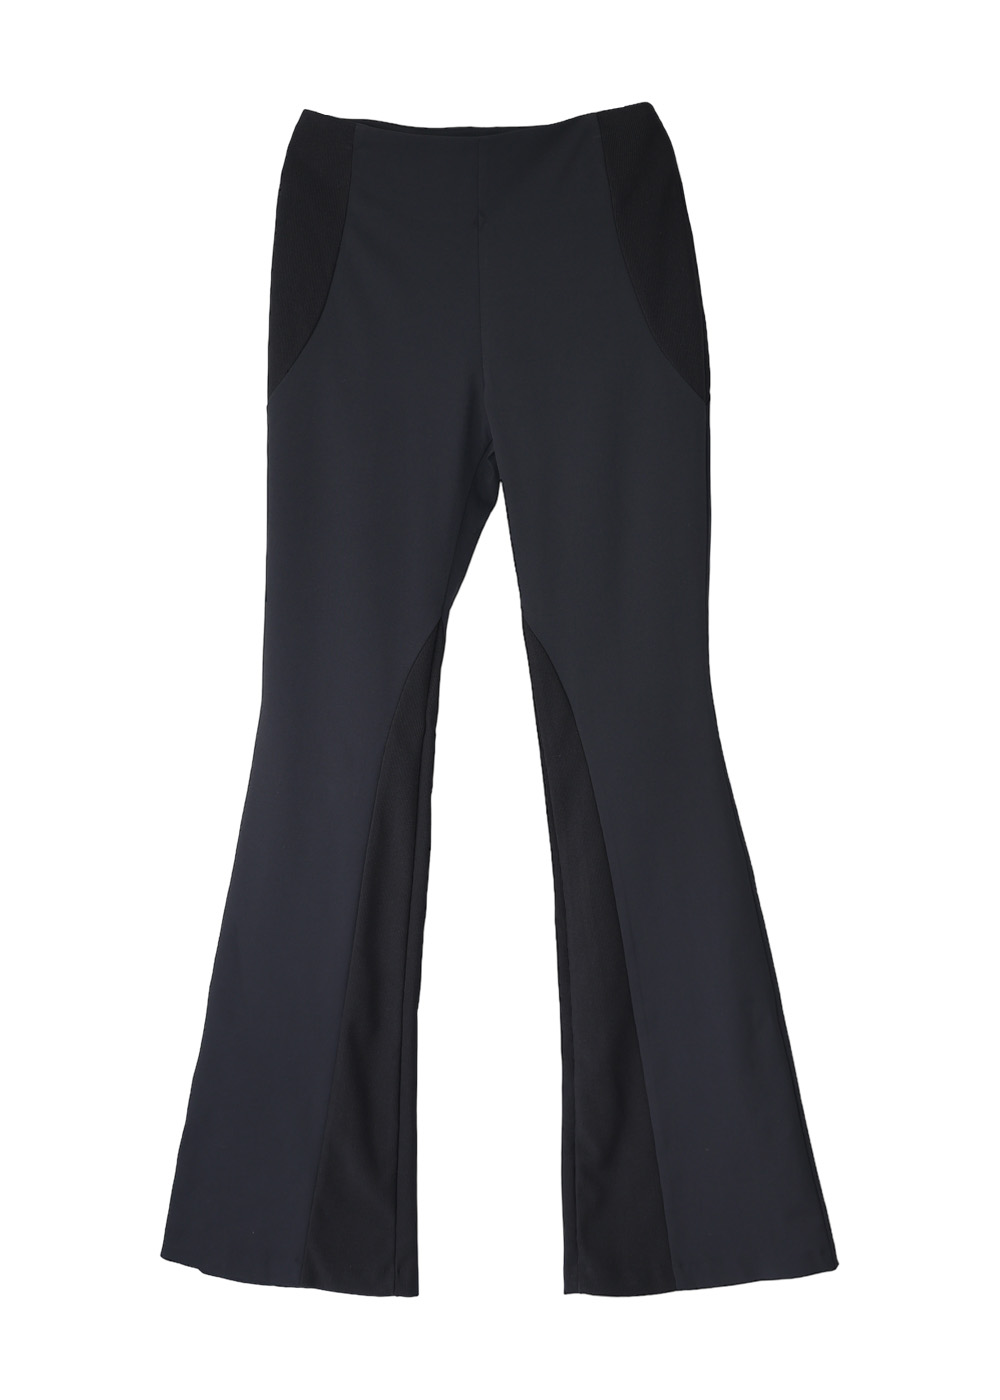 CURVED FLARE PANTS